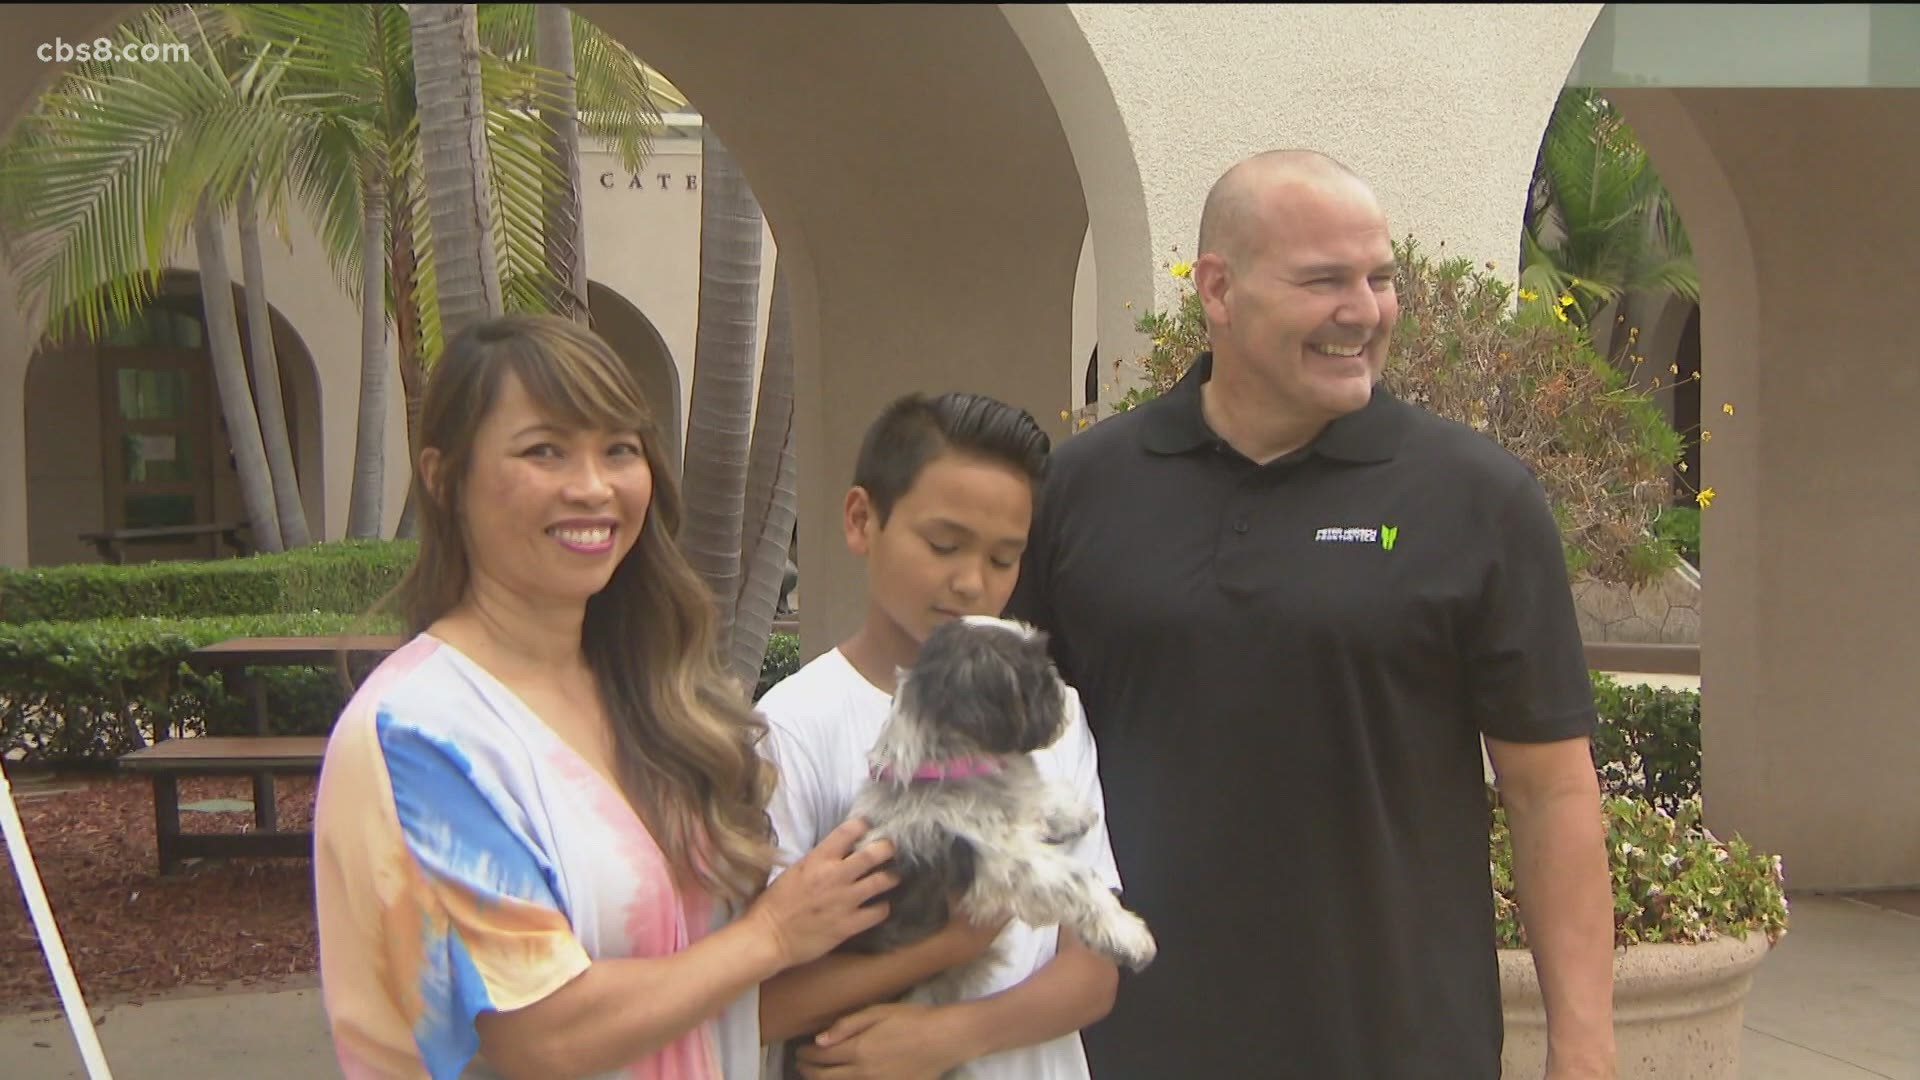 Detective James "Chappie" Hunter fostered Chloe, a 9-year-old Shih Tzu, at his family's Alpine home after she completed her three-month recovery at SDHS's Escondido